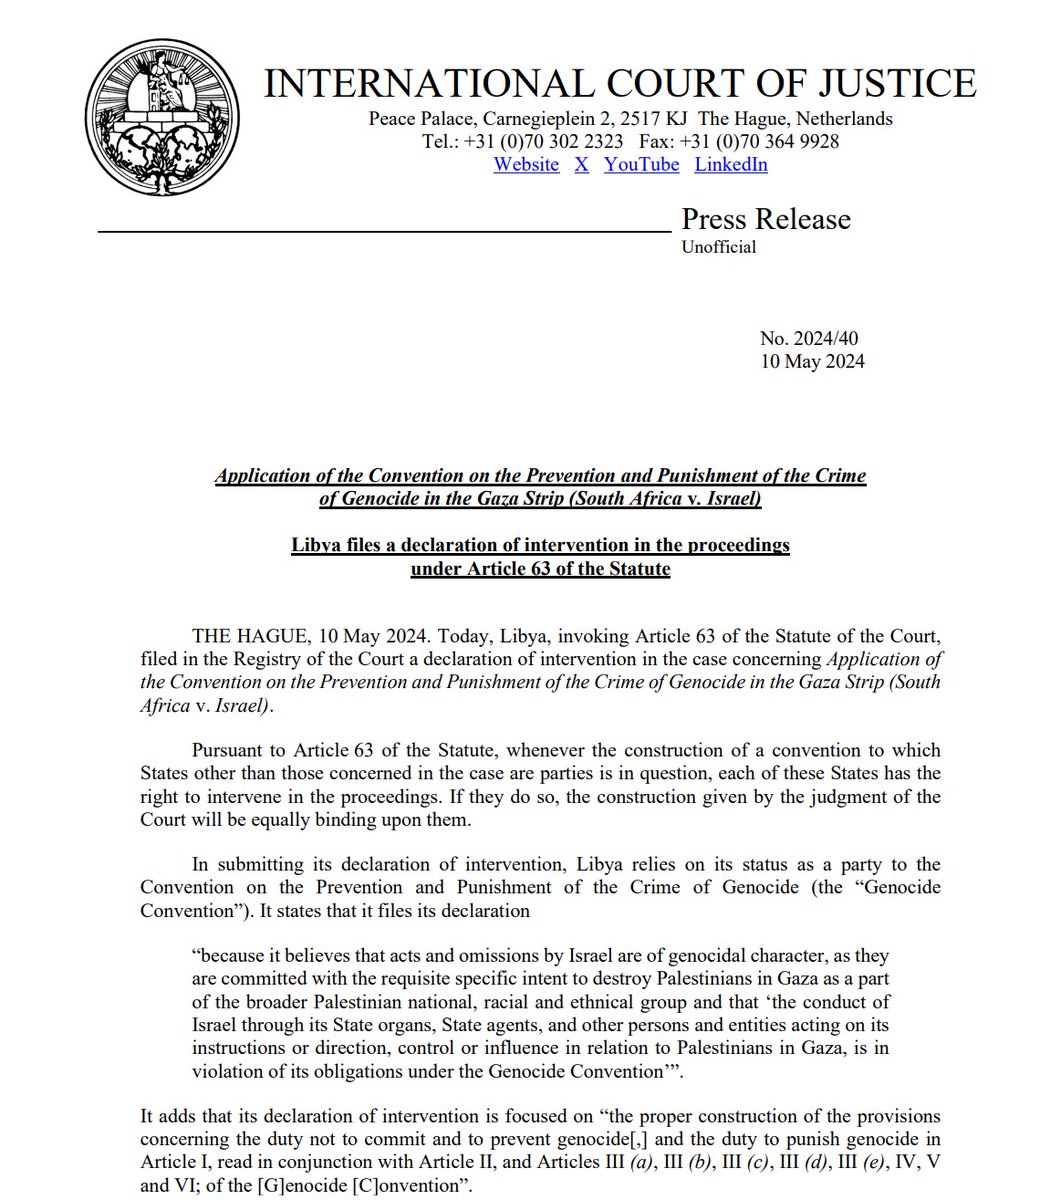 PRESS RELEASE: #Libya files a declaration of intervention under Article 63 of the #ICJ Statute in the case concerning Application of the Convention on the Prevention and Punishment of the Crime of Genocide in the Gaza Strip (#SouthAfrica v. #Israel) bit.ly/4dBPNUE